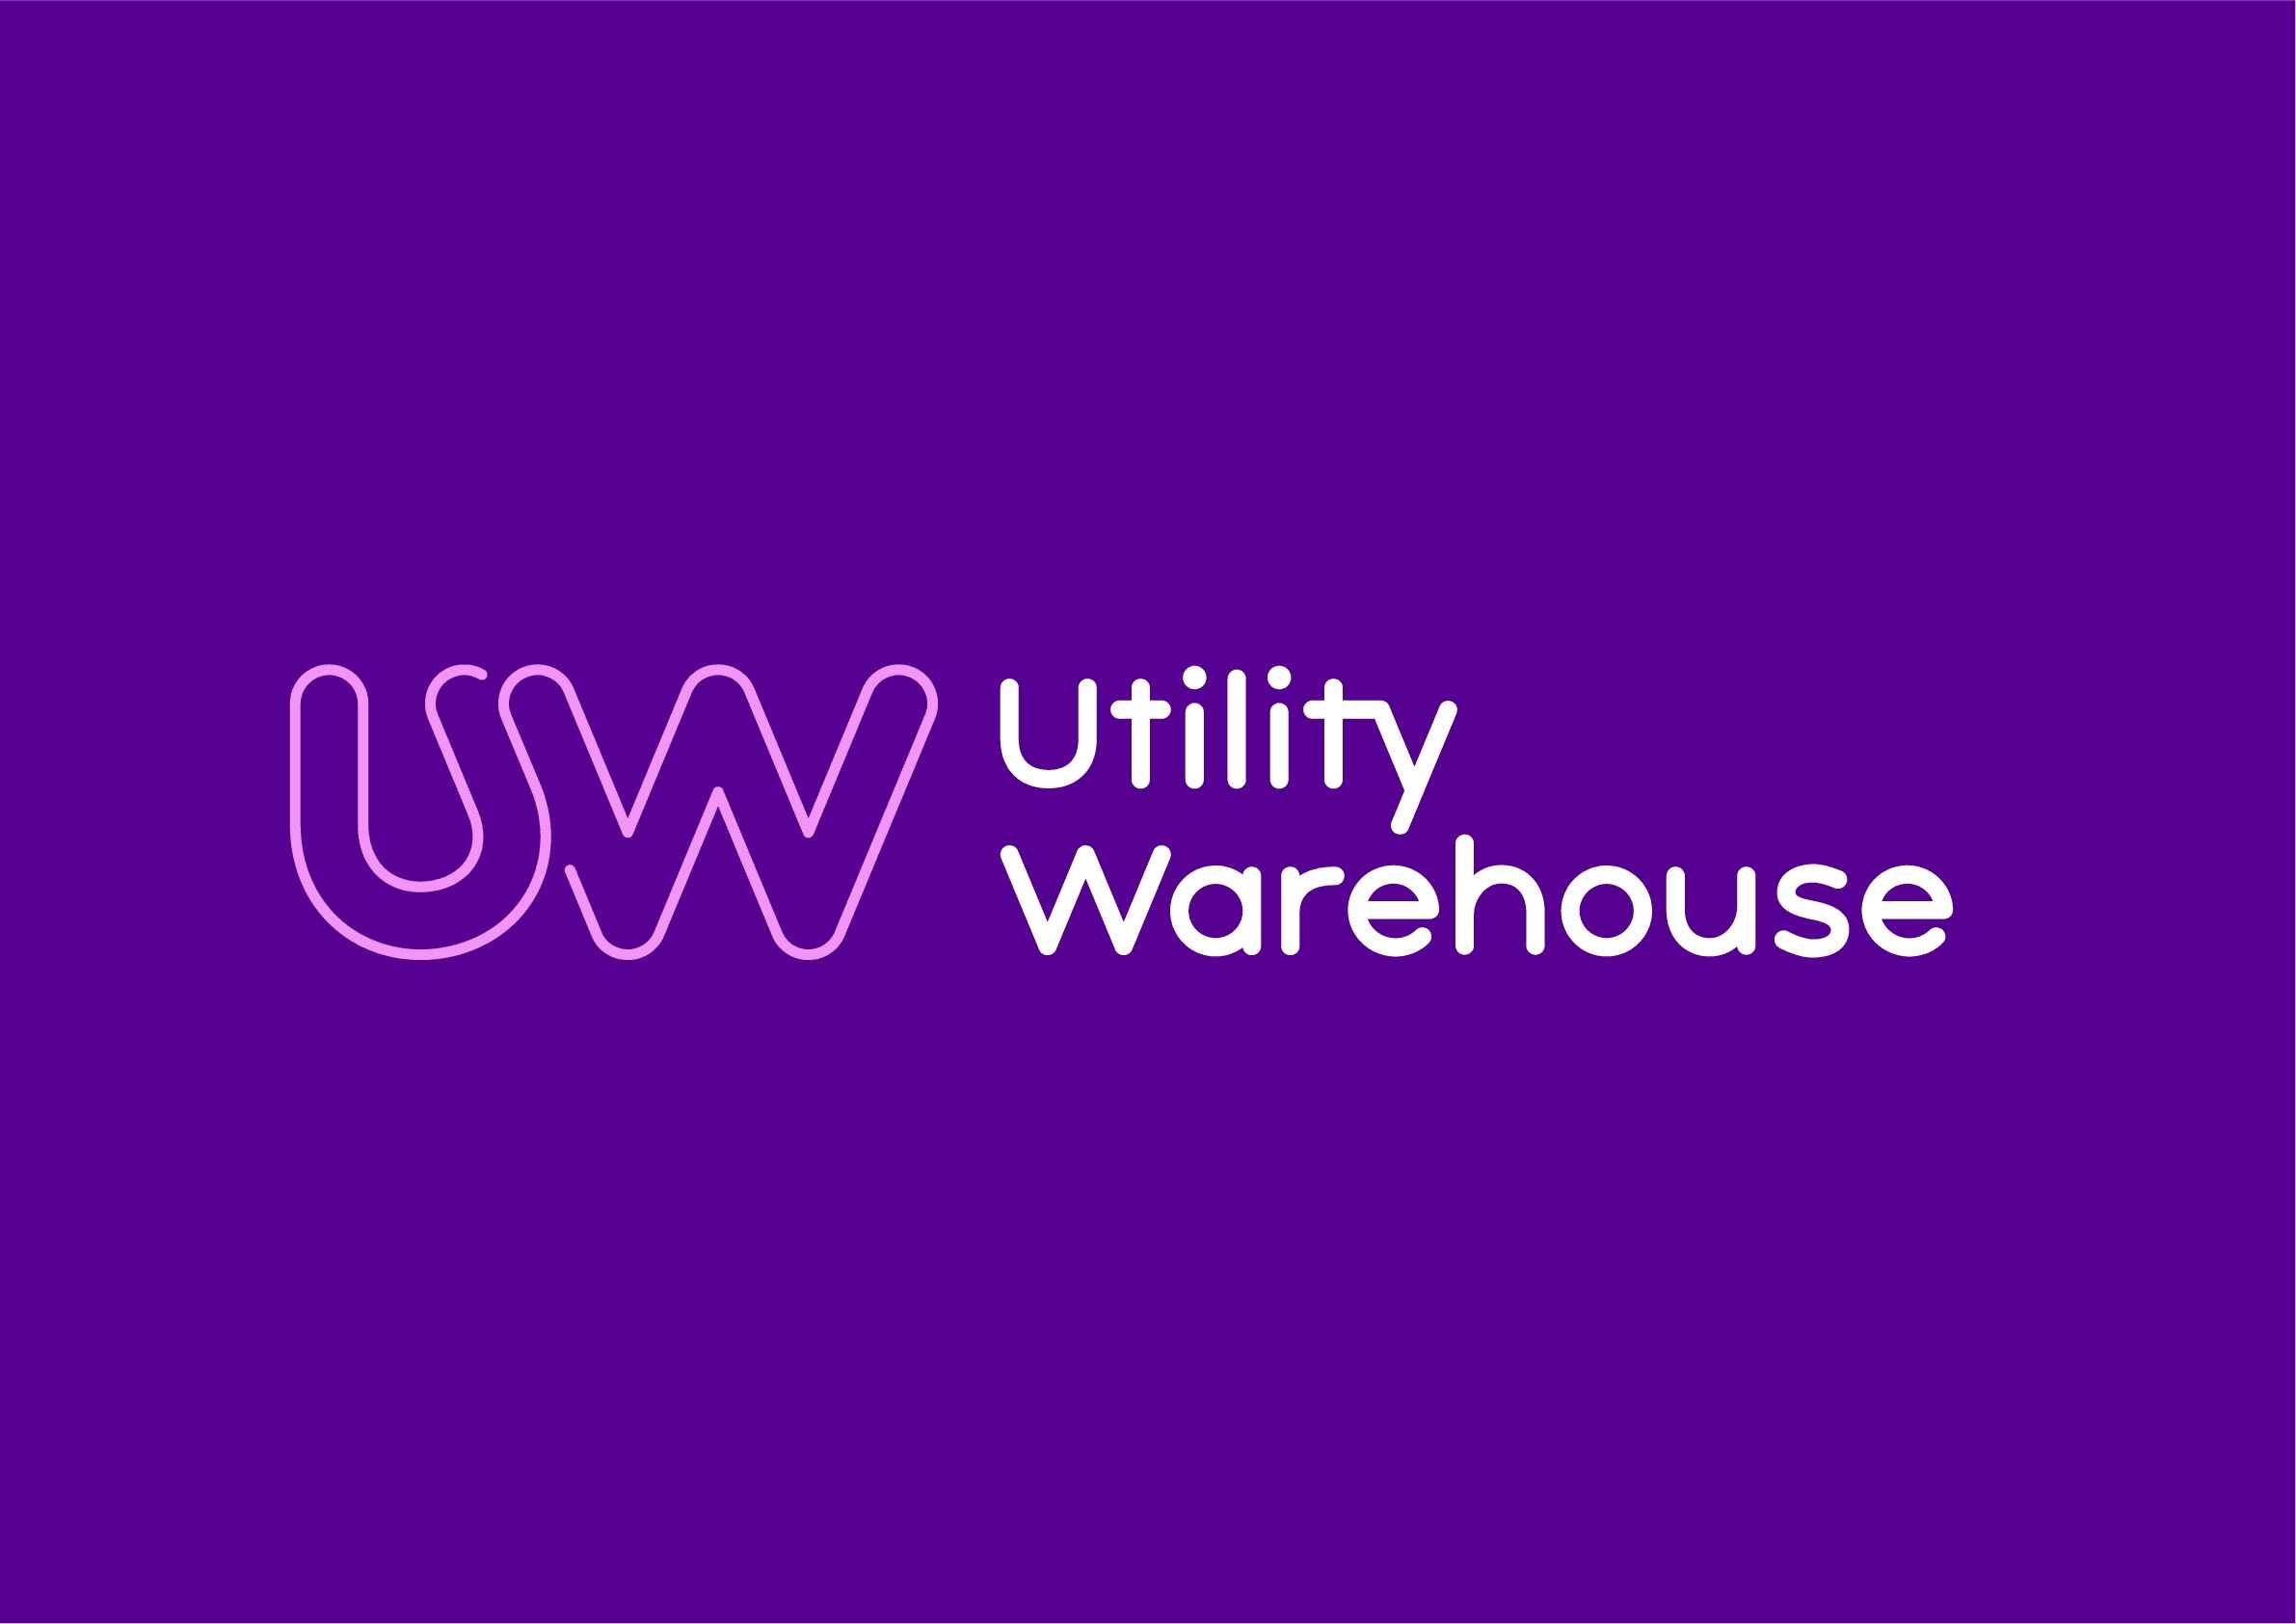 utility-warehouse-agrees-to-pay-1.5m-for-failing-customers-in-debt